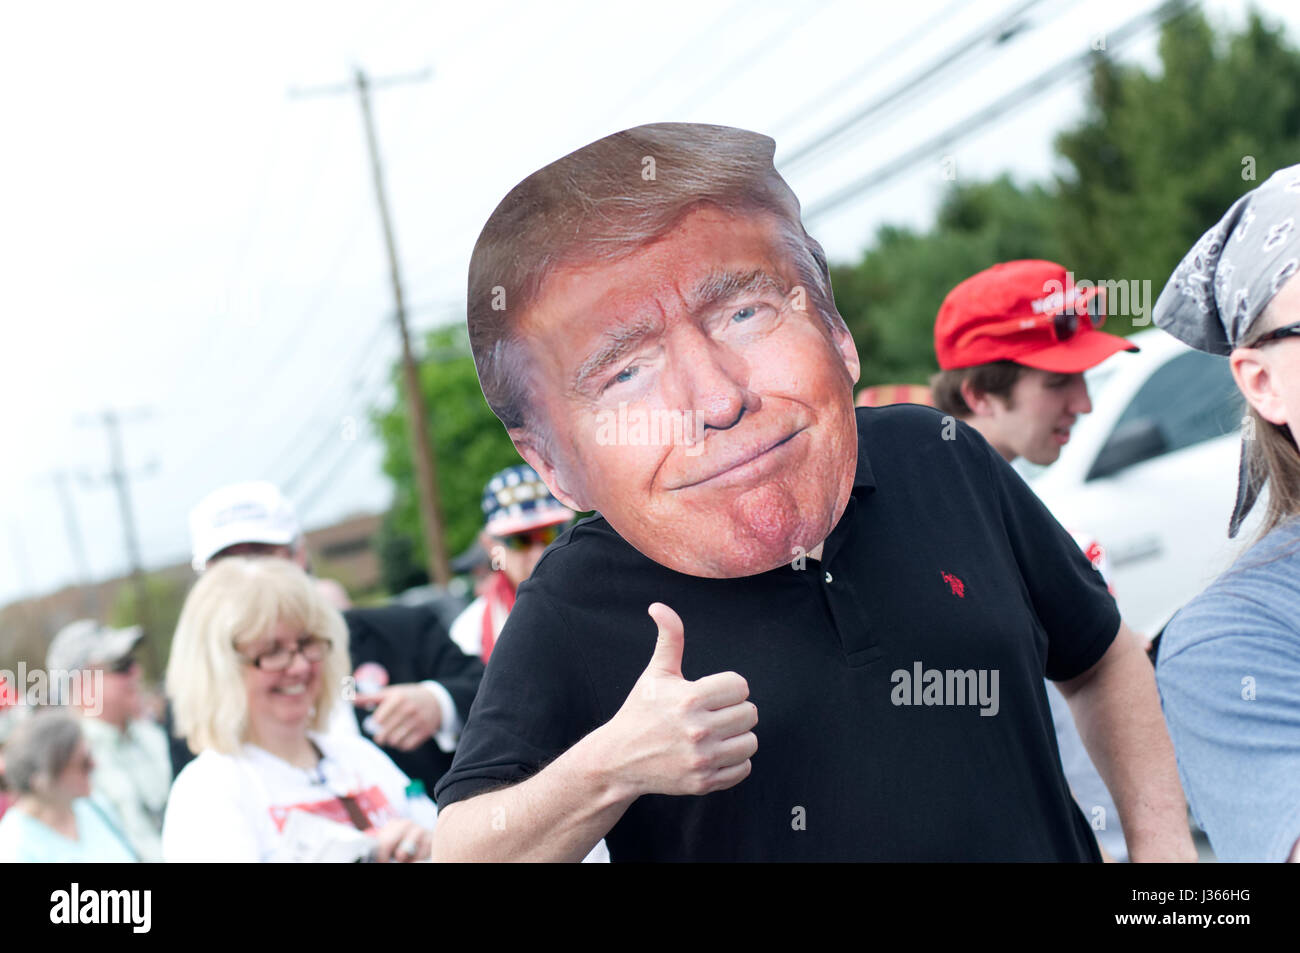 Trump supporters wait in line for hours ahead of the April 29, 2017 rally of President Trump in Harrisburg, PA. The “Make America Great Again” event i Stock Photo